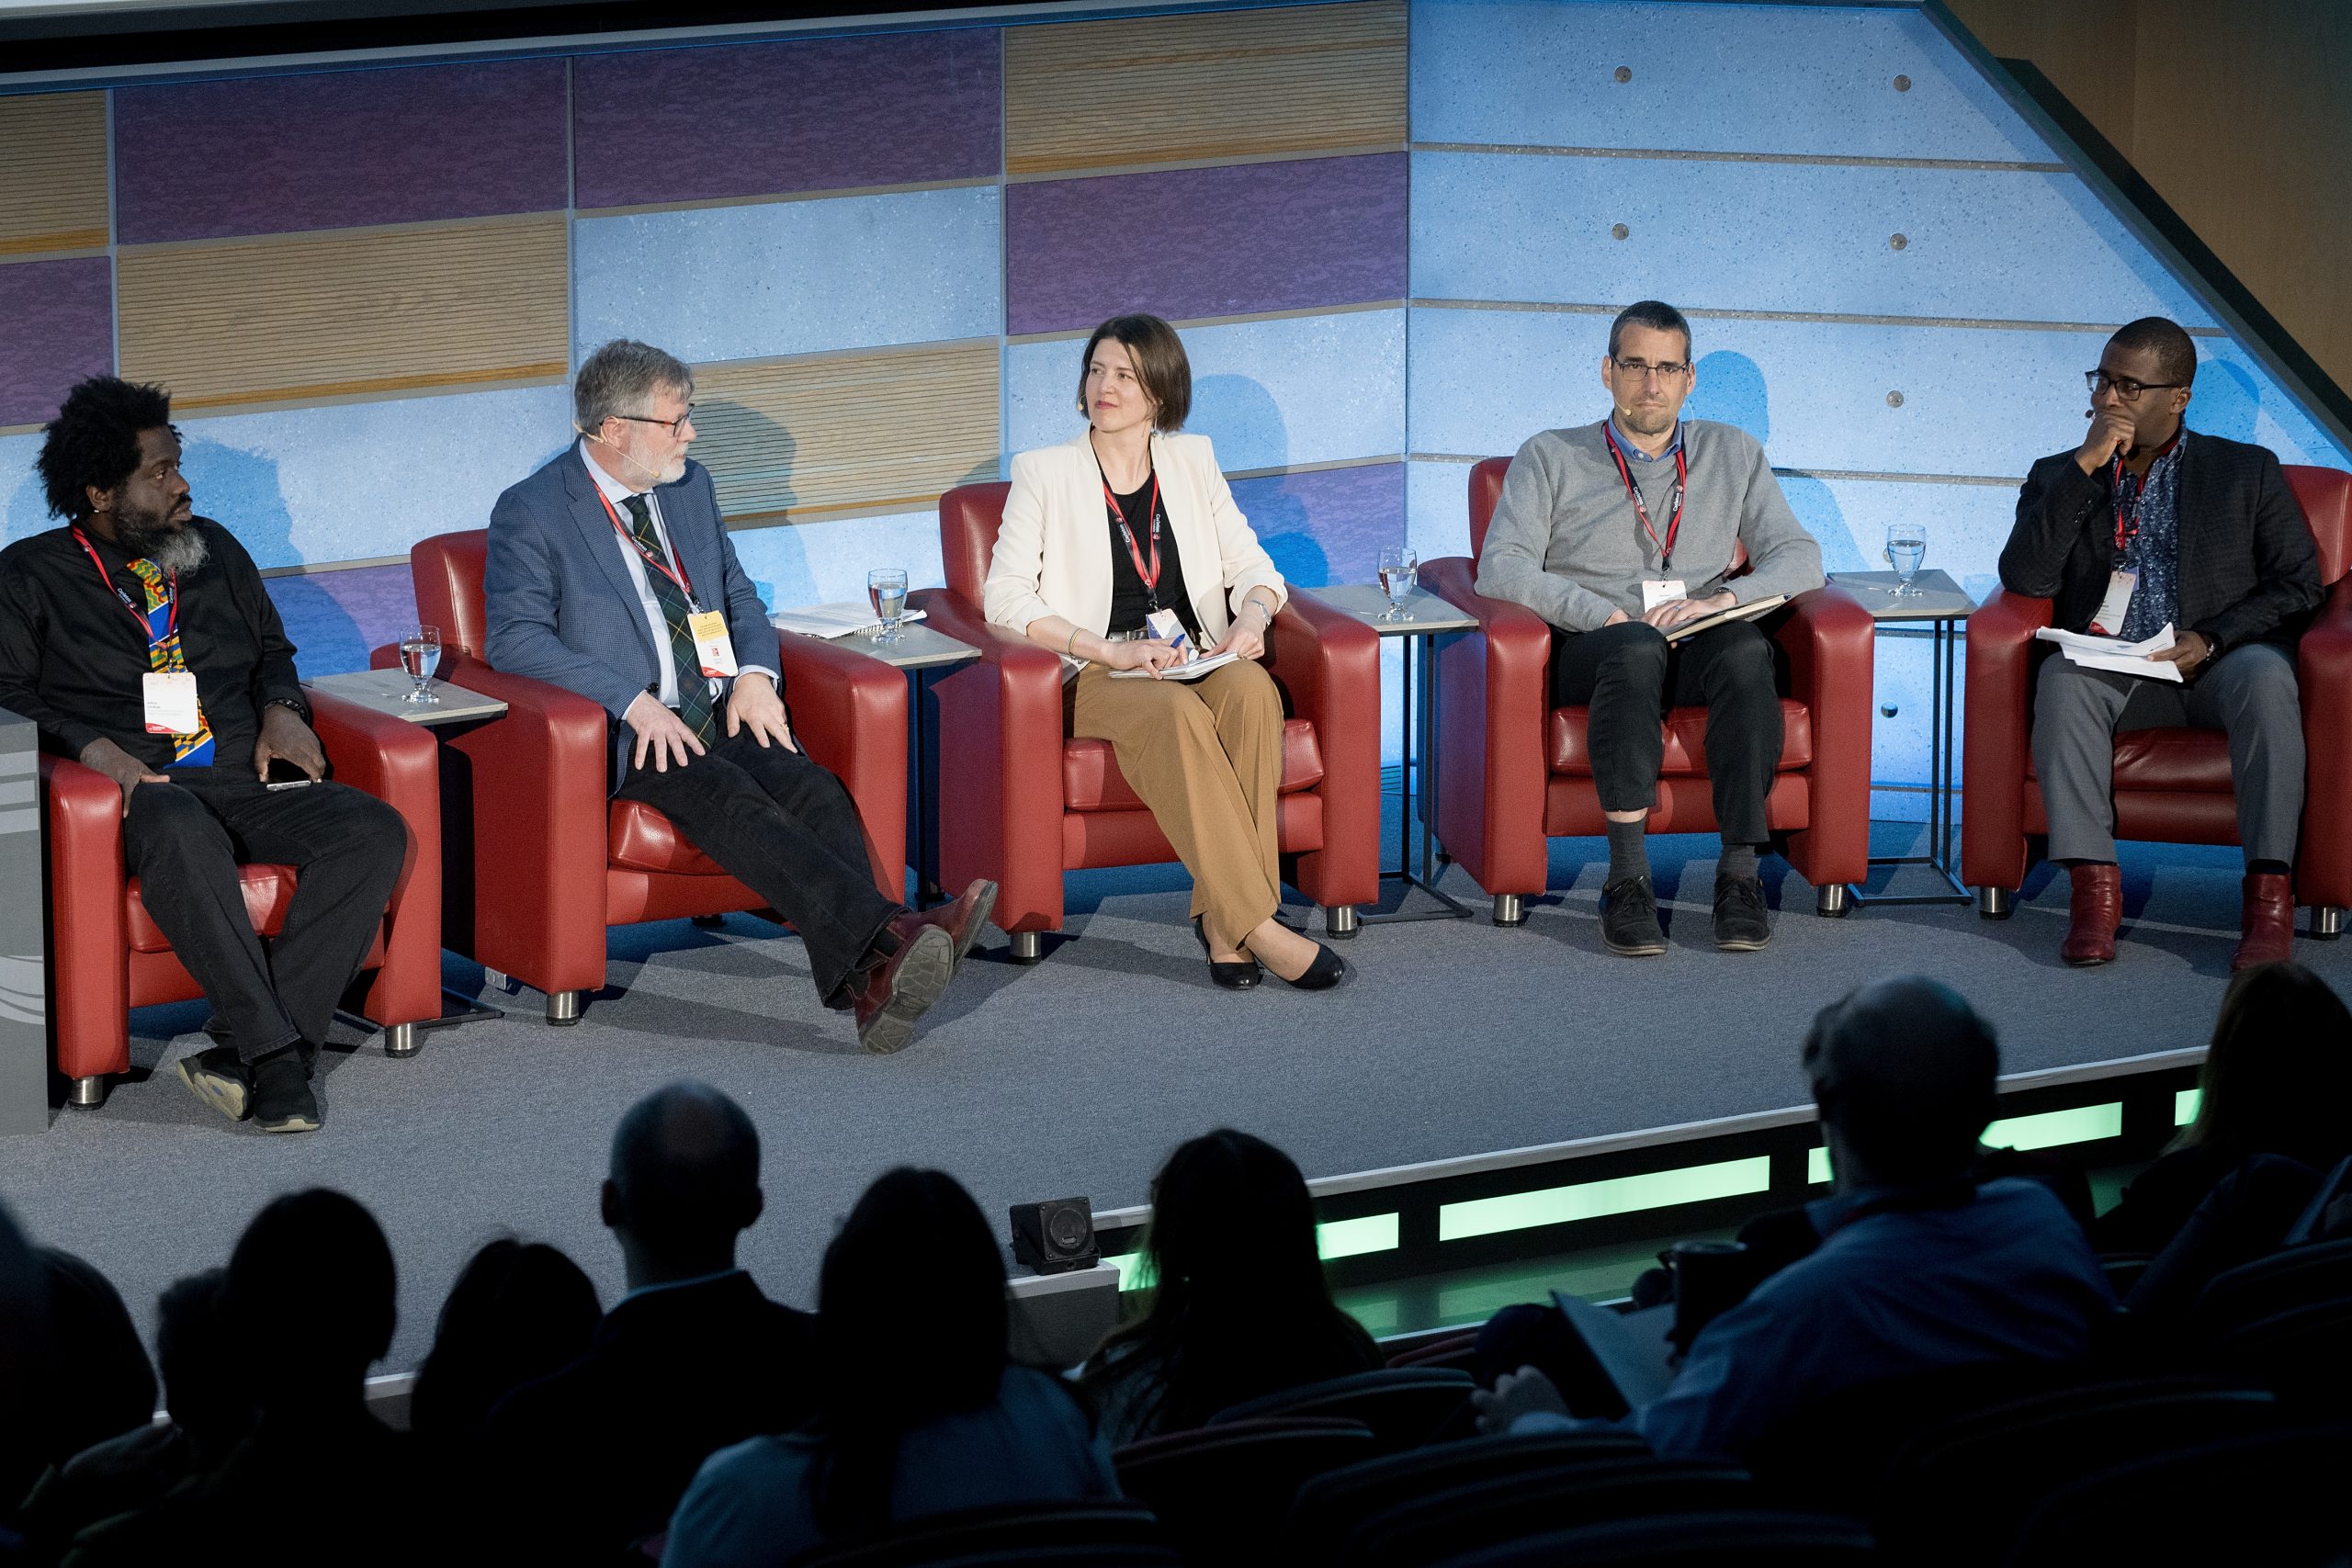 Five people on a conference panel engage in discussion in front of an audience.